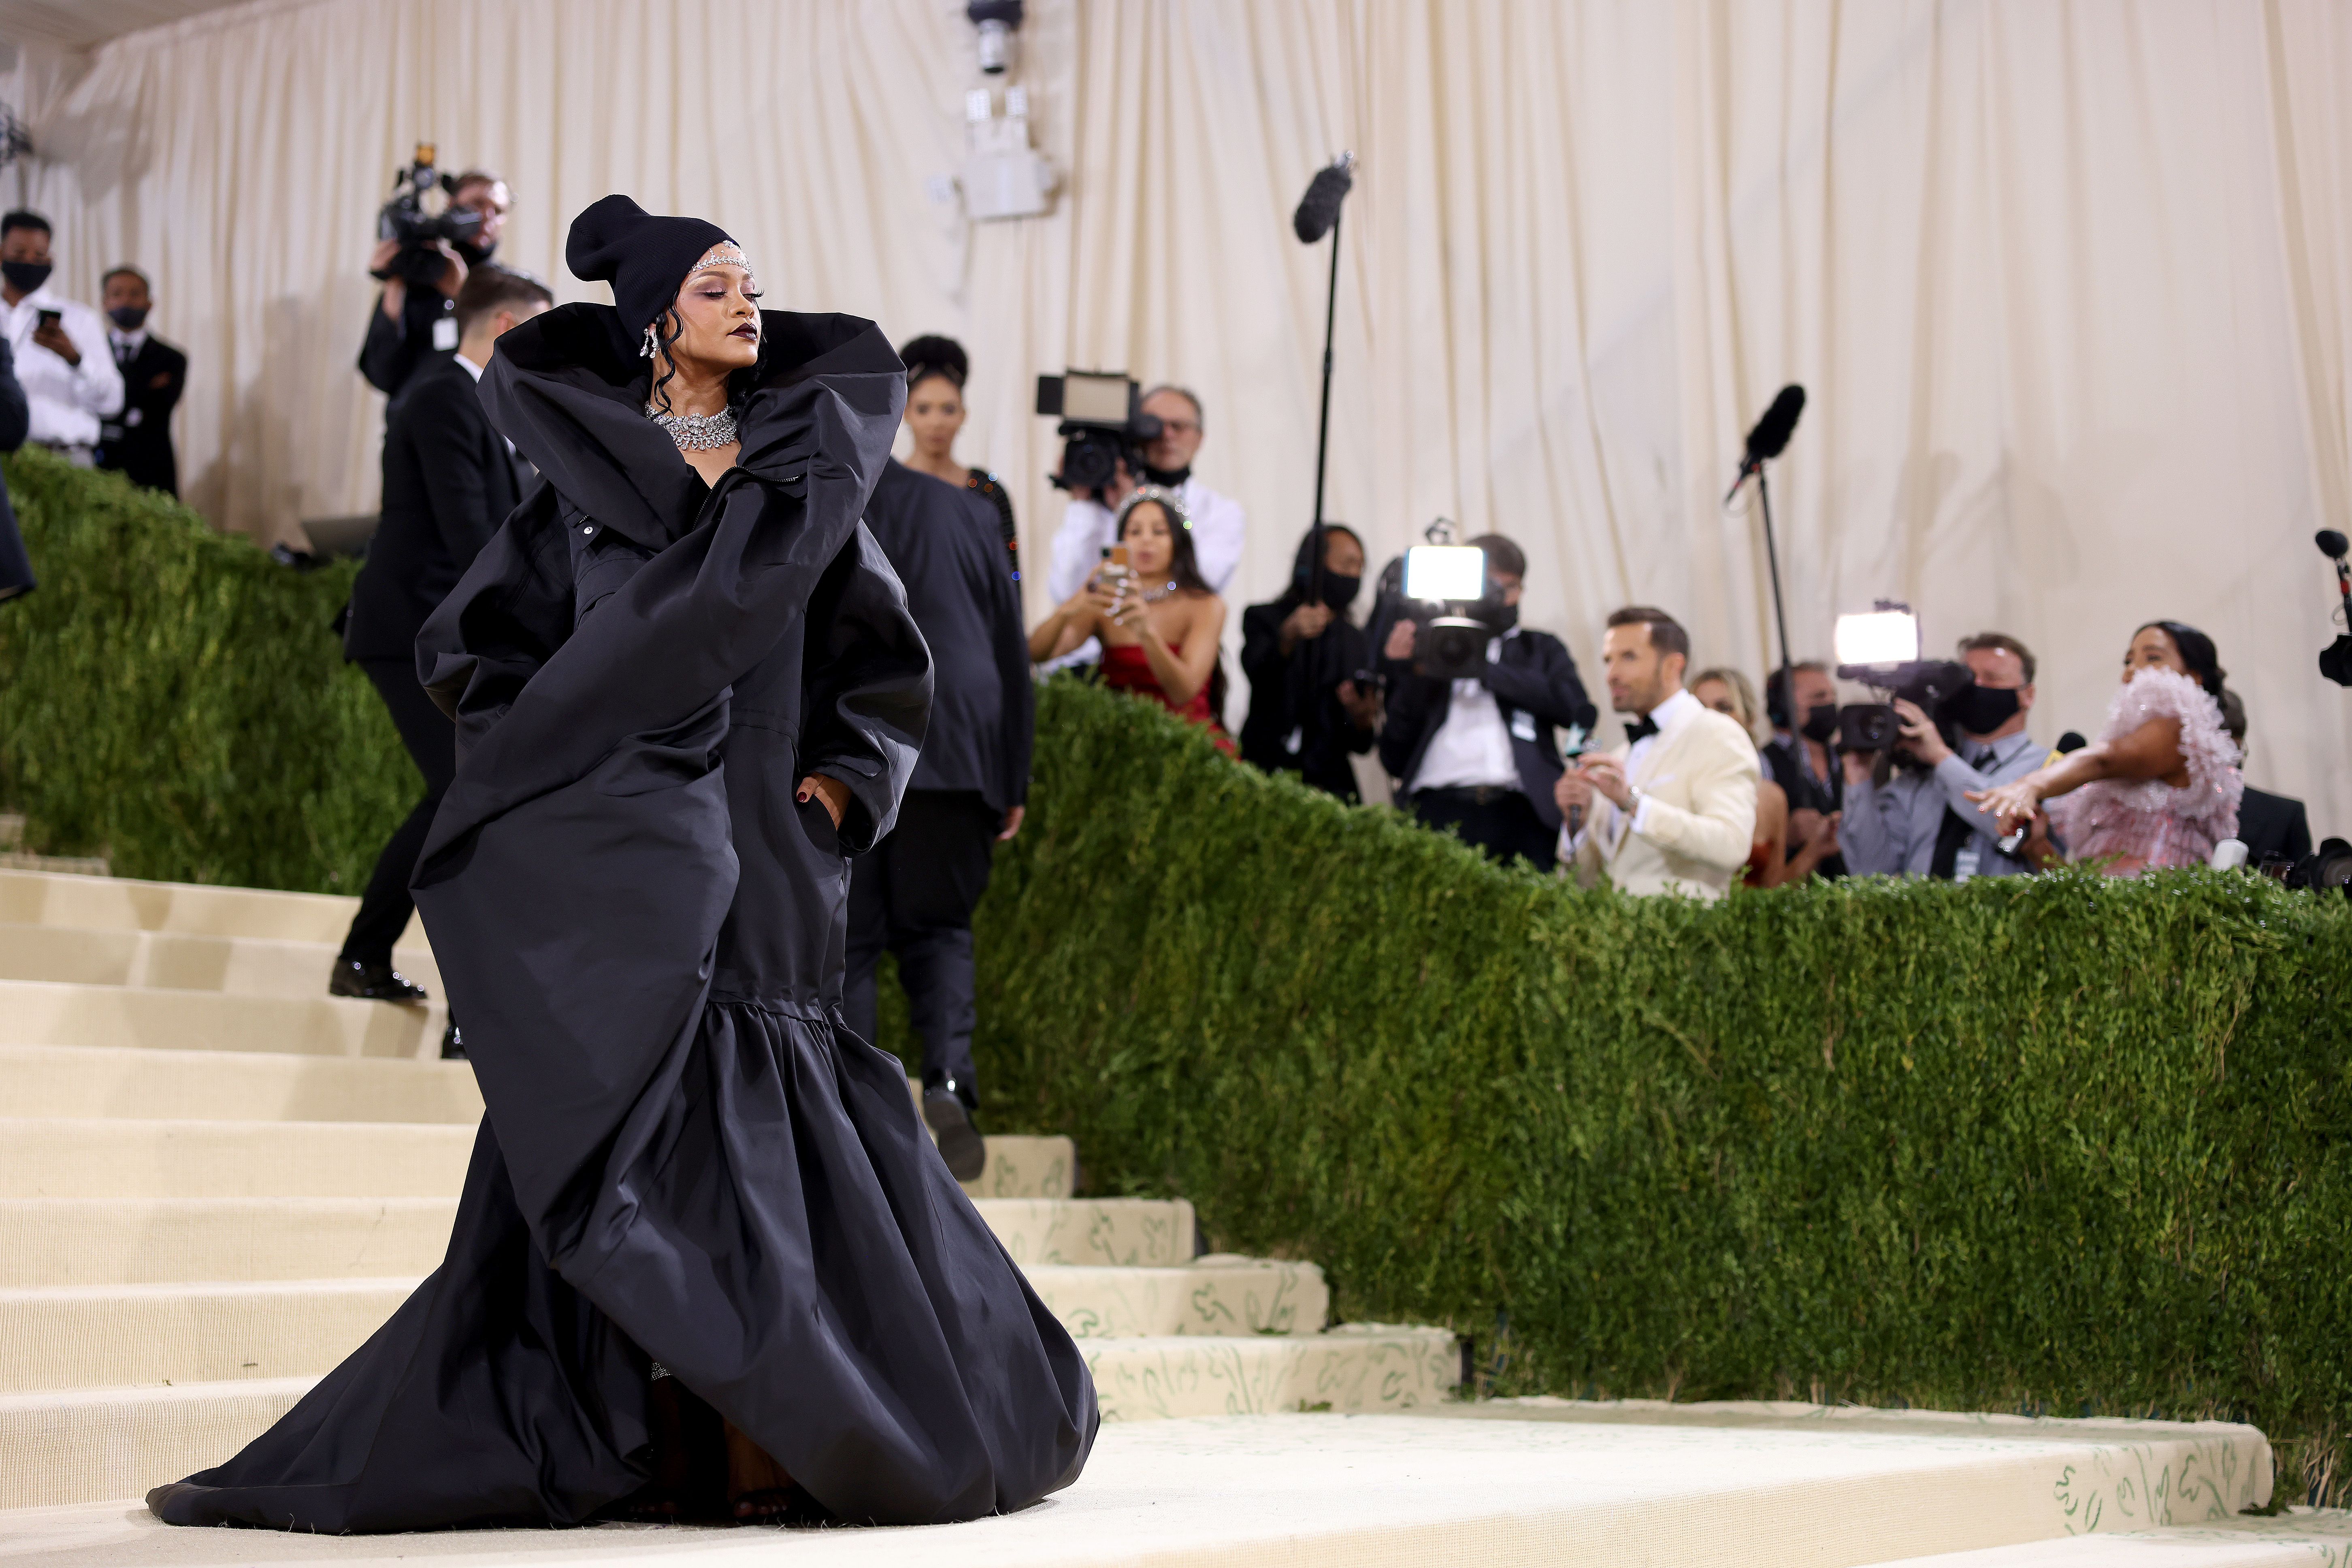 Met Gala 2021 Red Carpet: All the Celebrity Dresses, Outfits, and Looks —  See Photos